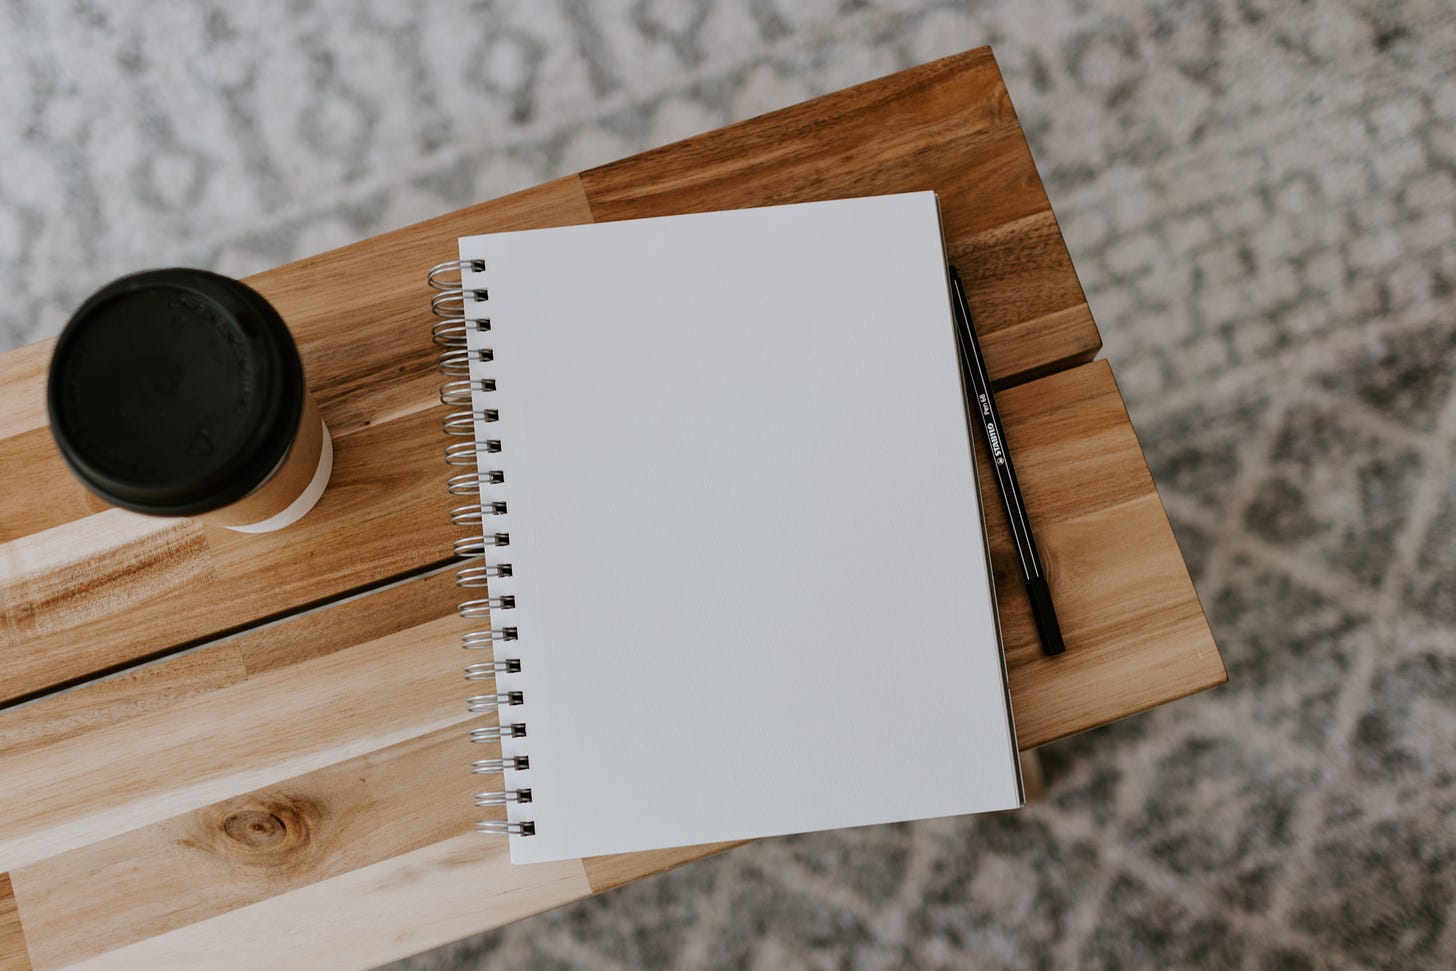 A notebook, pen and coffee cup sitting on a wooden bench